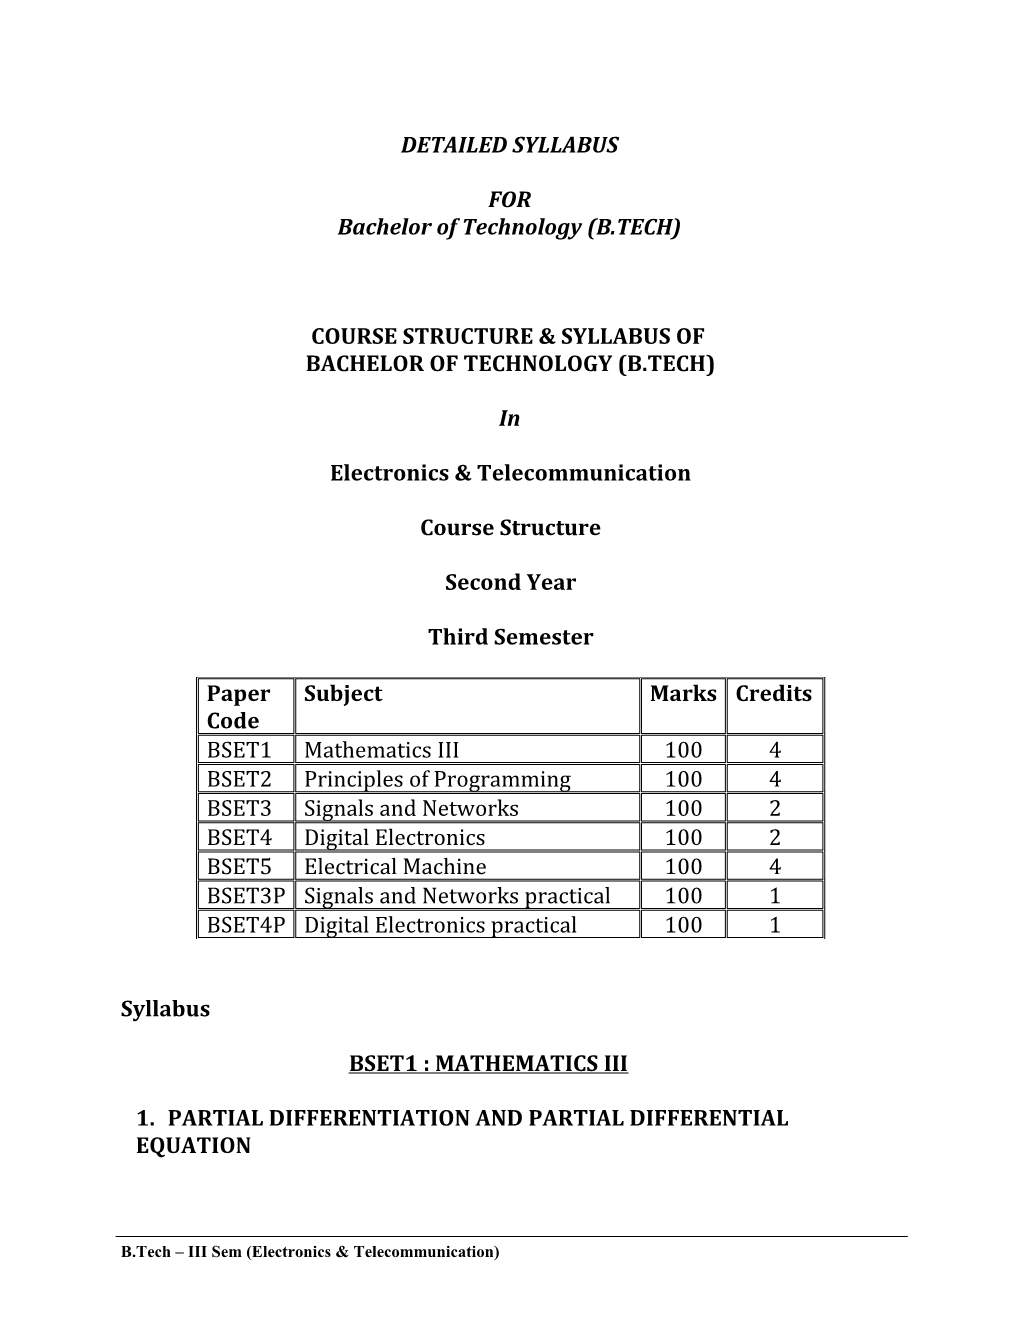 Course Structure & Syllabus of Diploma Engineering